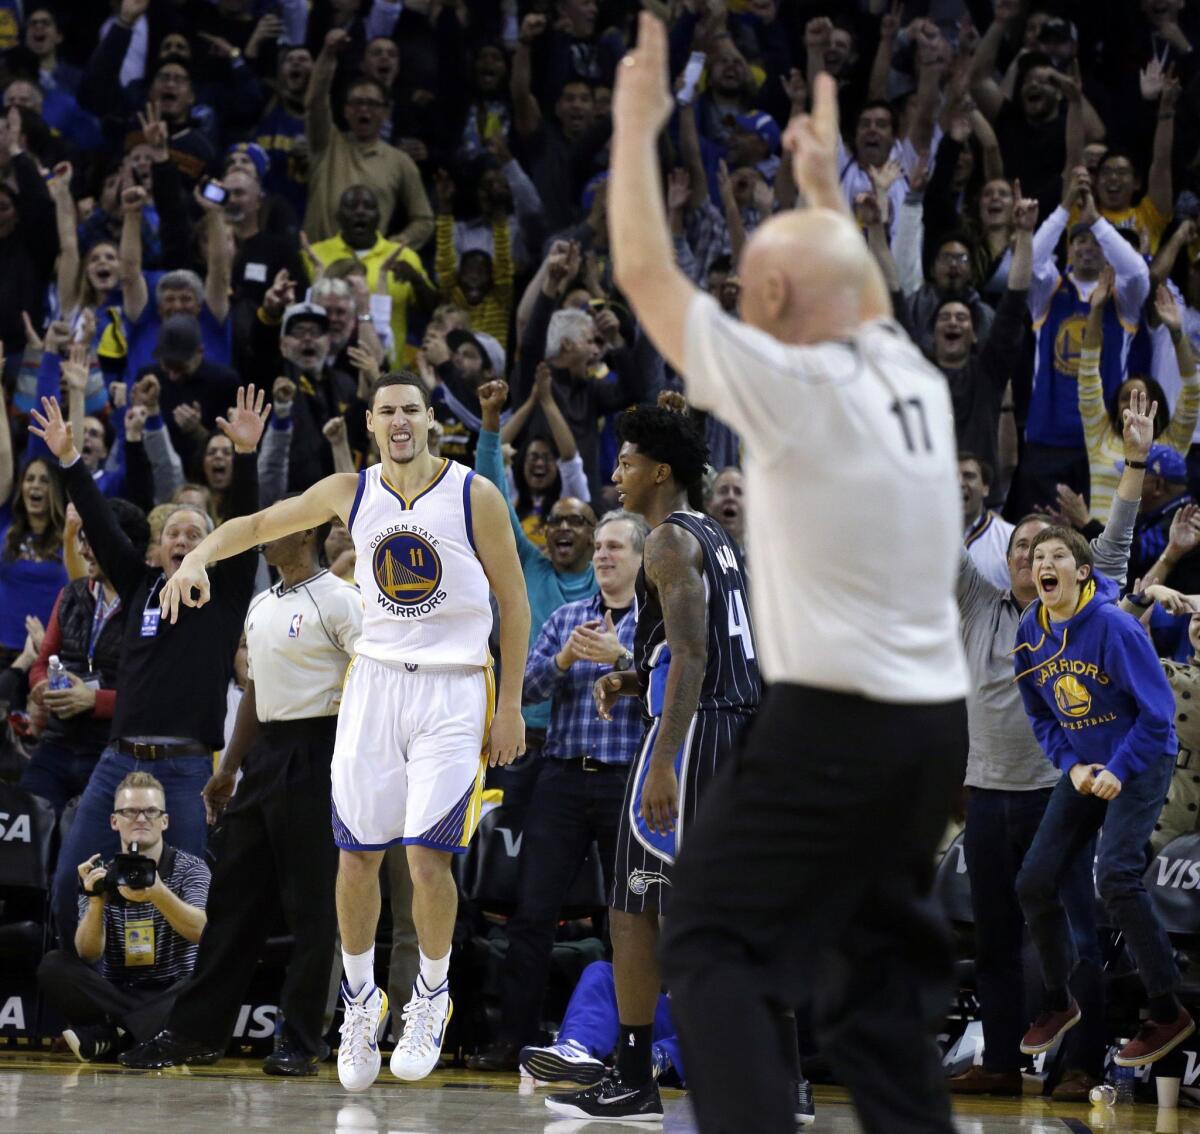 Golden State's Klay Thompson celebrates a score against Orlando on Dec. 2, 2014, in Oakland.